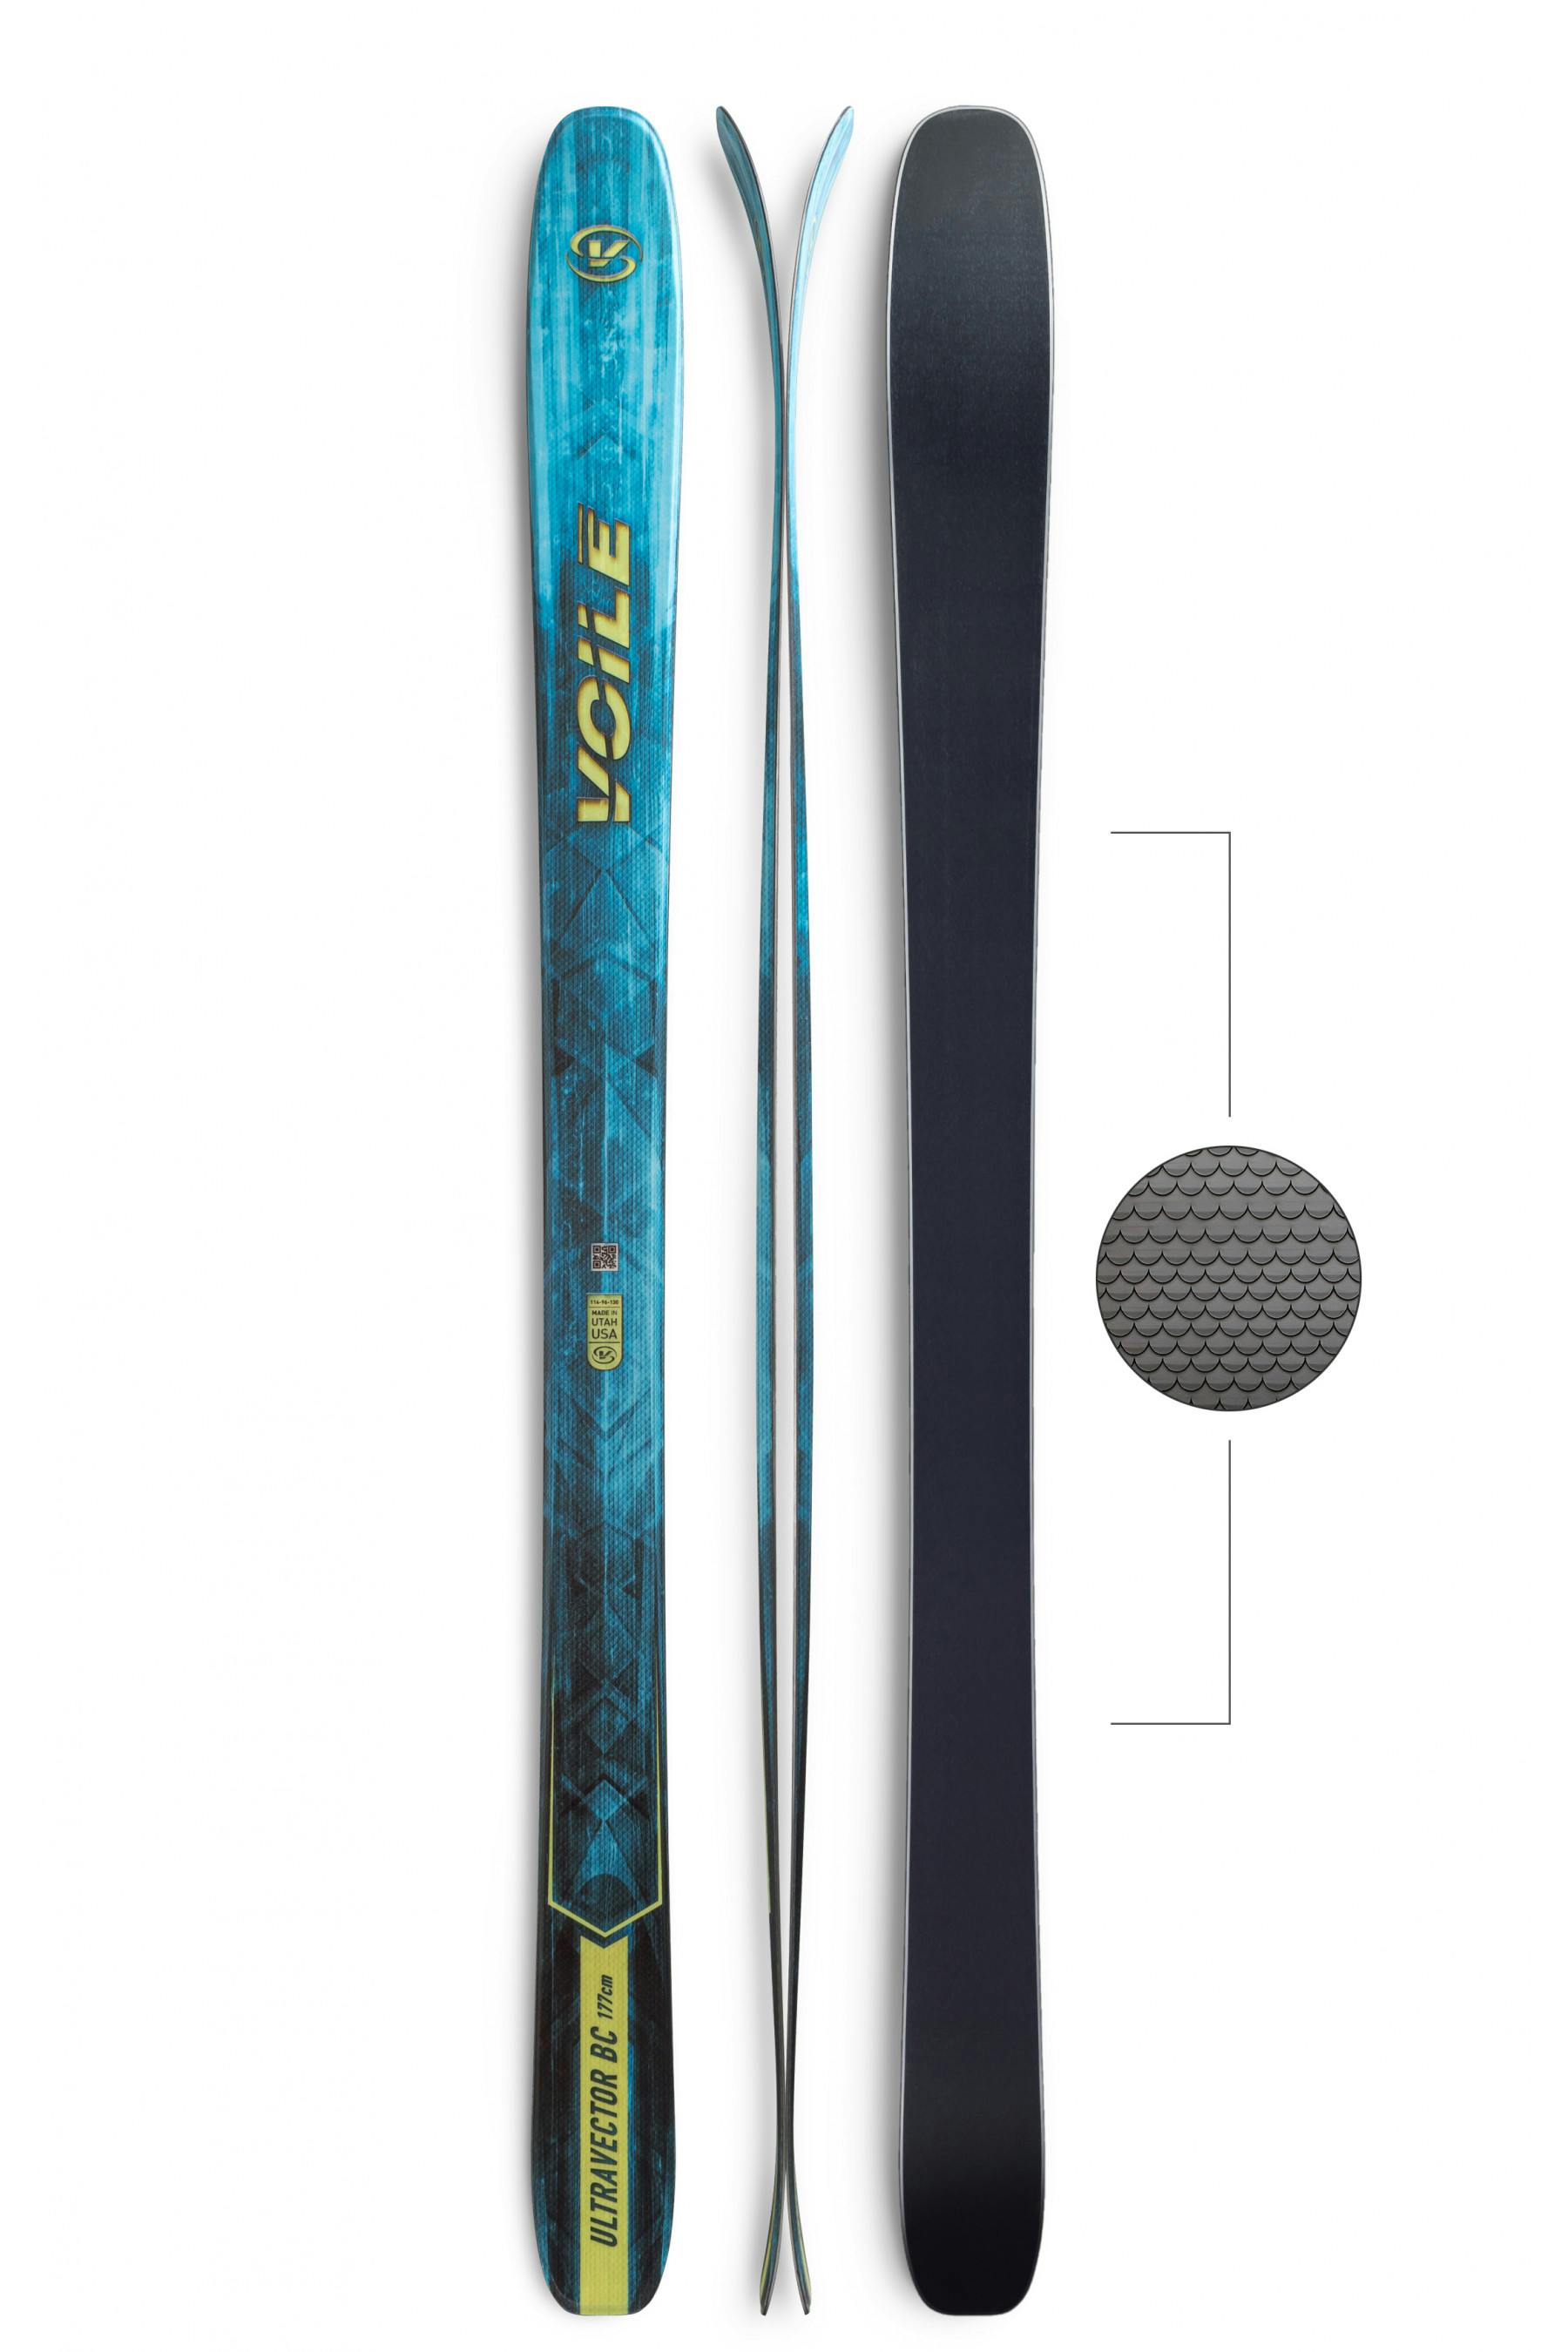 Voile Ultravector BC Skis